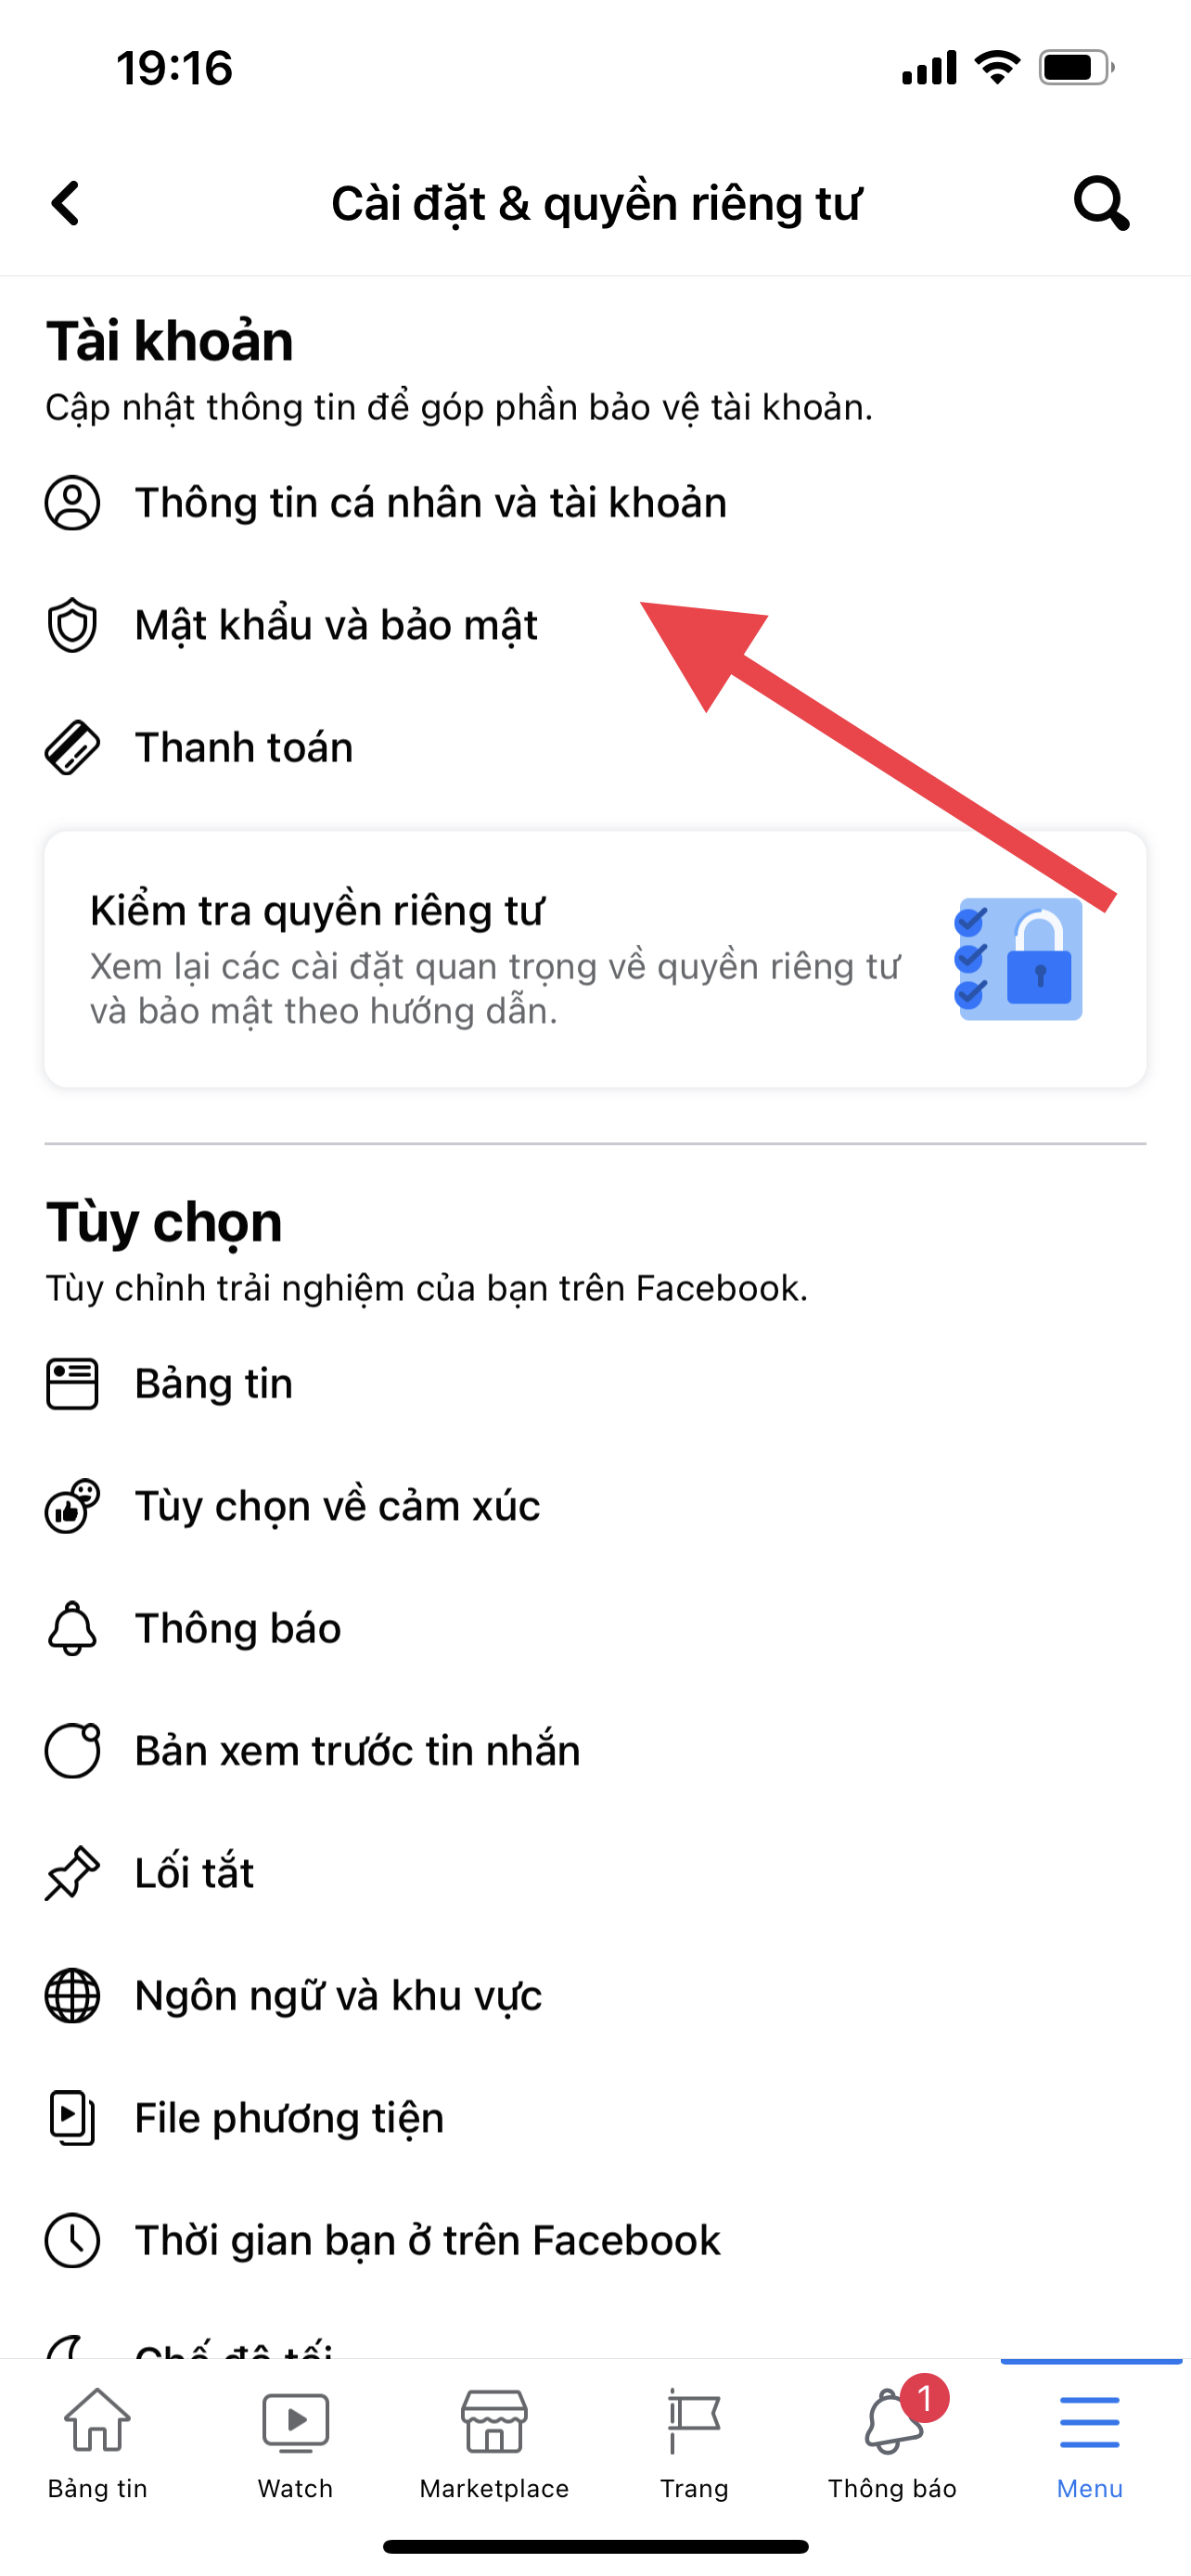 You may not know: Messenger doesn't have a sign out button, how do you sign out of the account without having to delete the app?  - Picture 4.